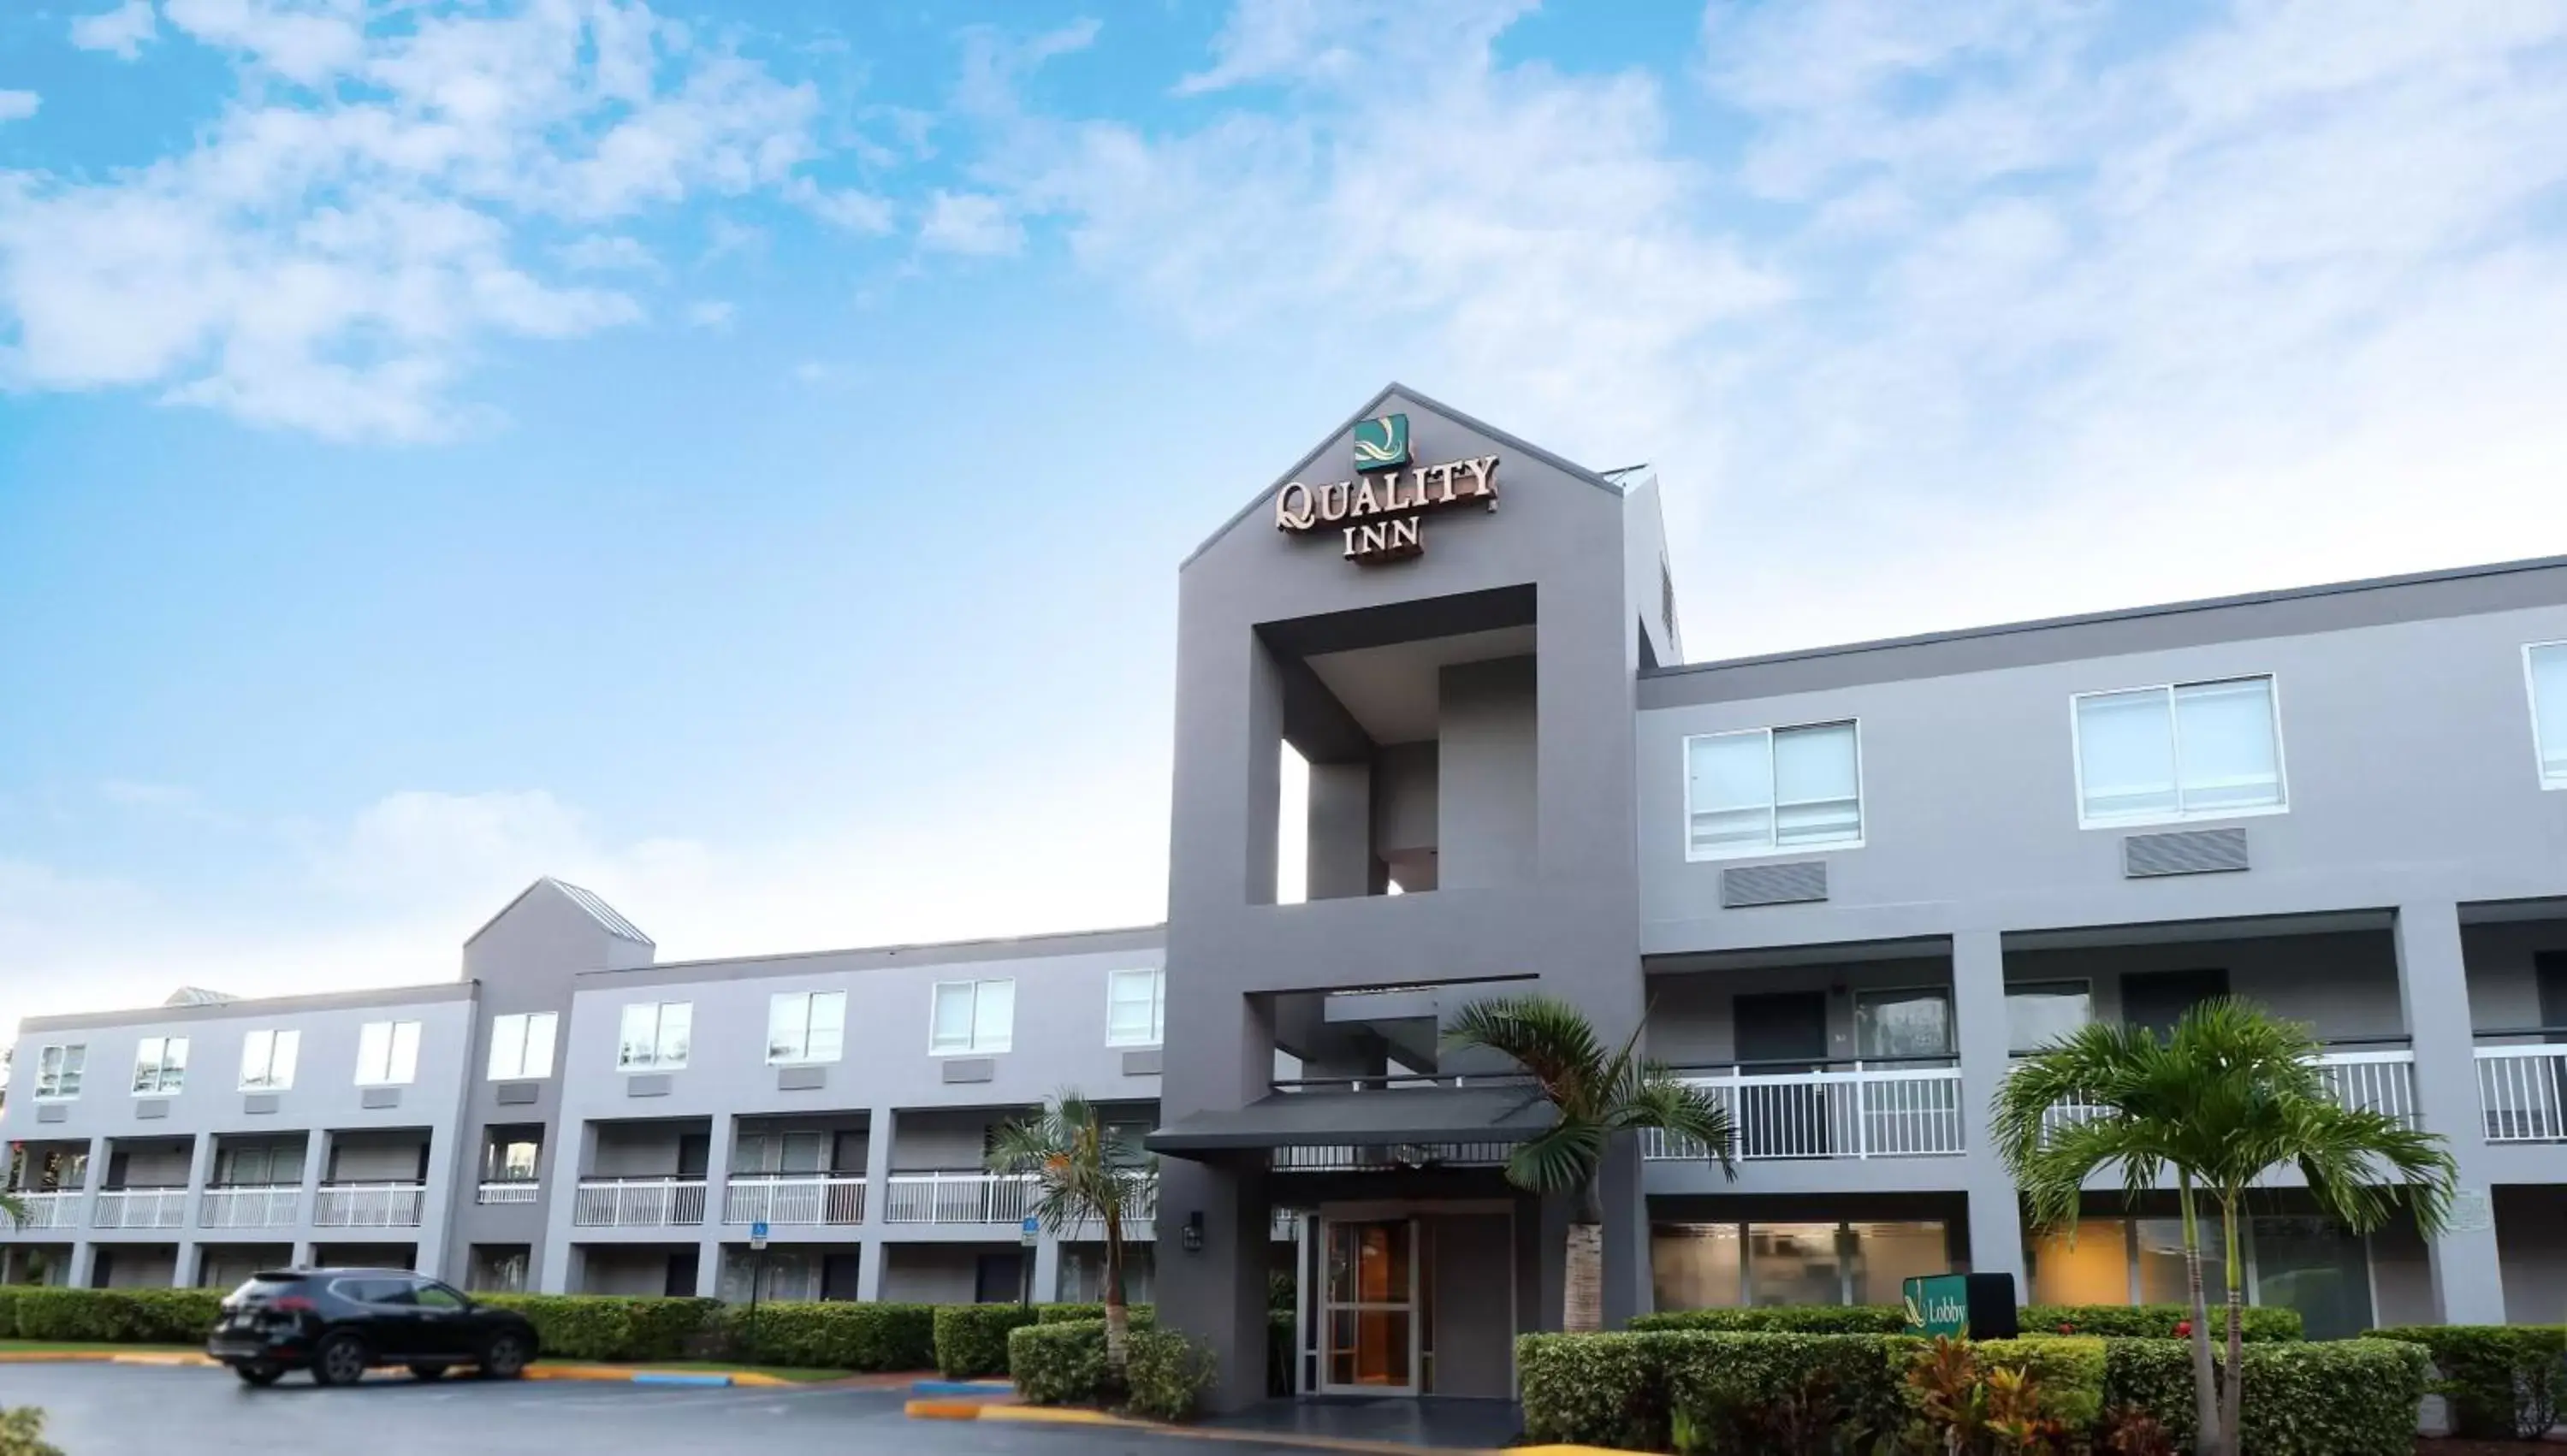 Property Building in Quality Inn Miami Airport - Doral